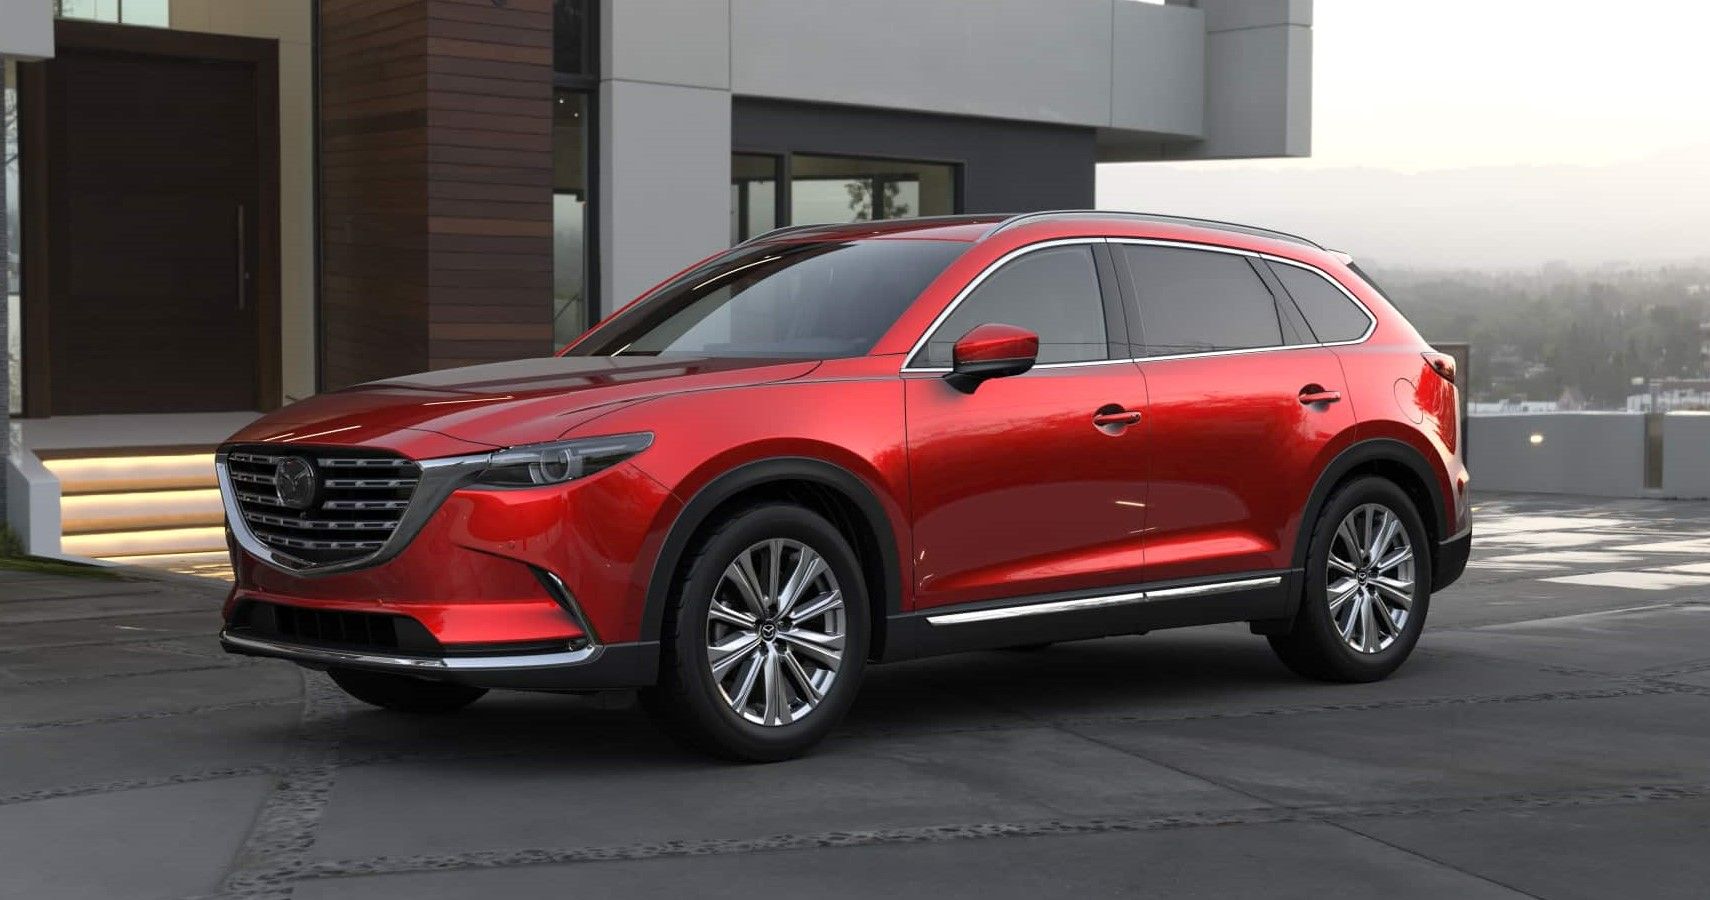 2023 Mazda CX-9 in red front third quarter view